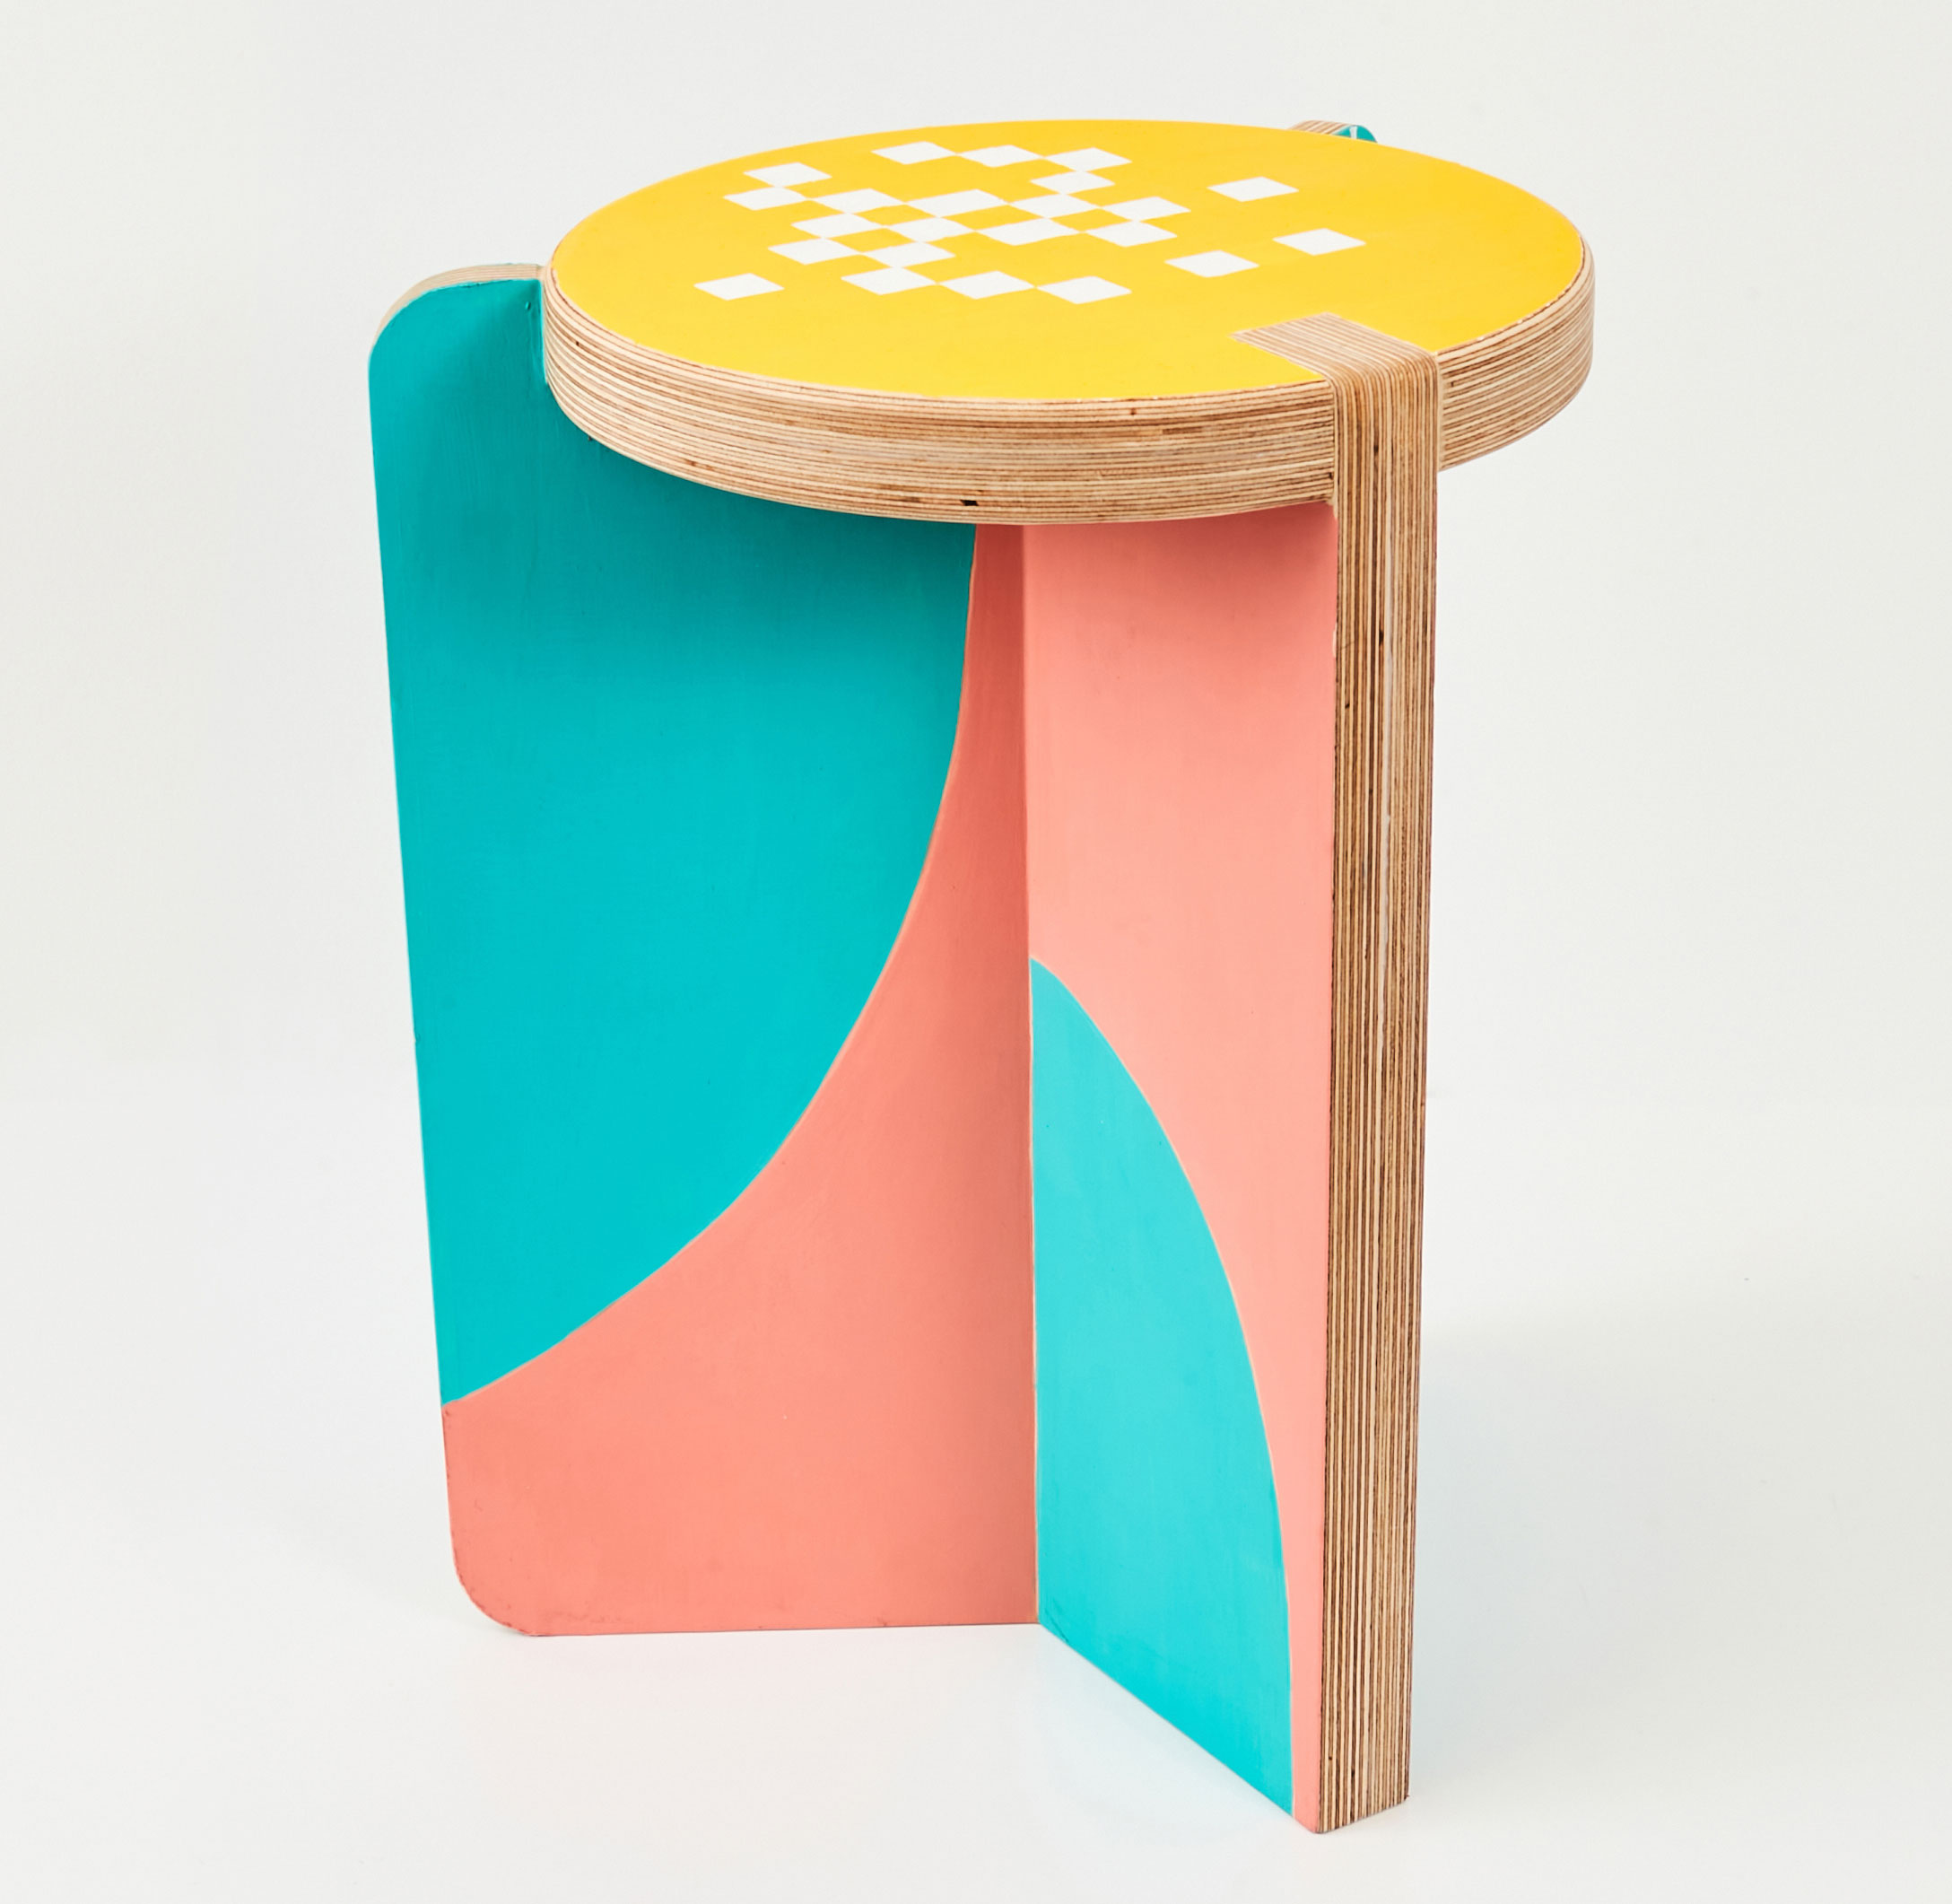 Le Stool, design conceptualised by Patricia Ho Douven and painted by Suzanne Chin